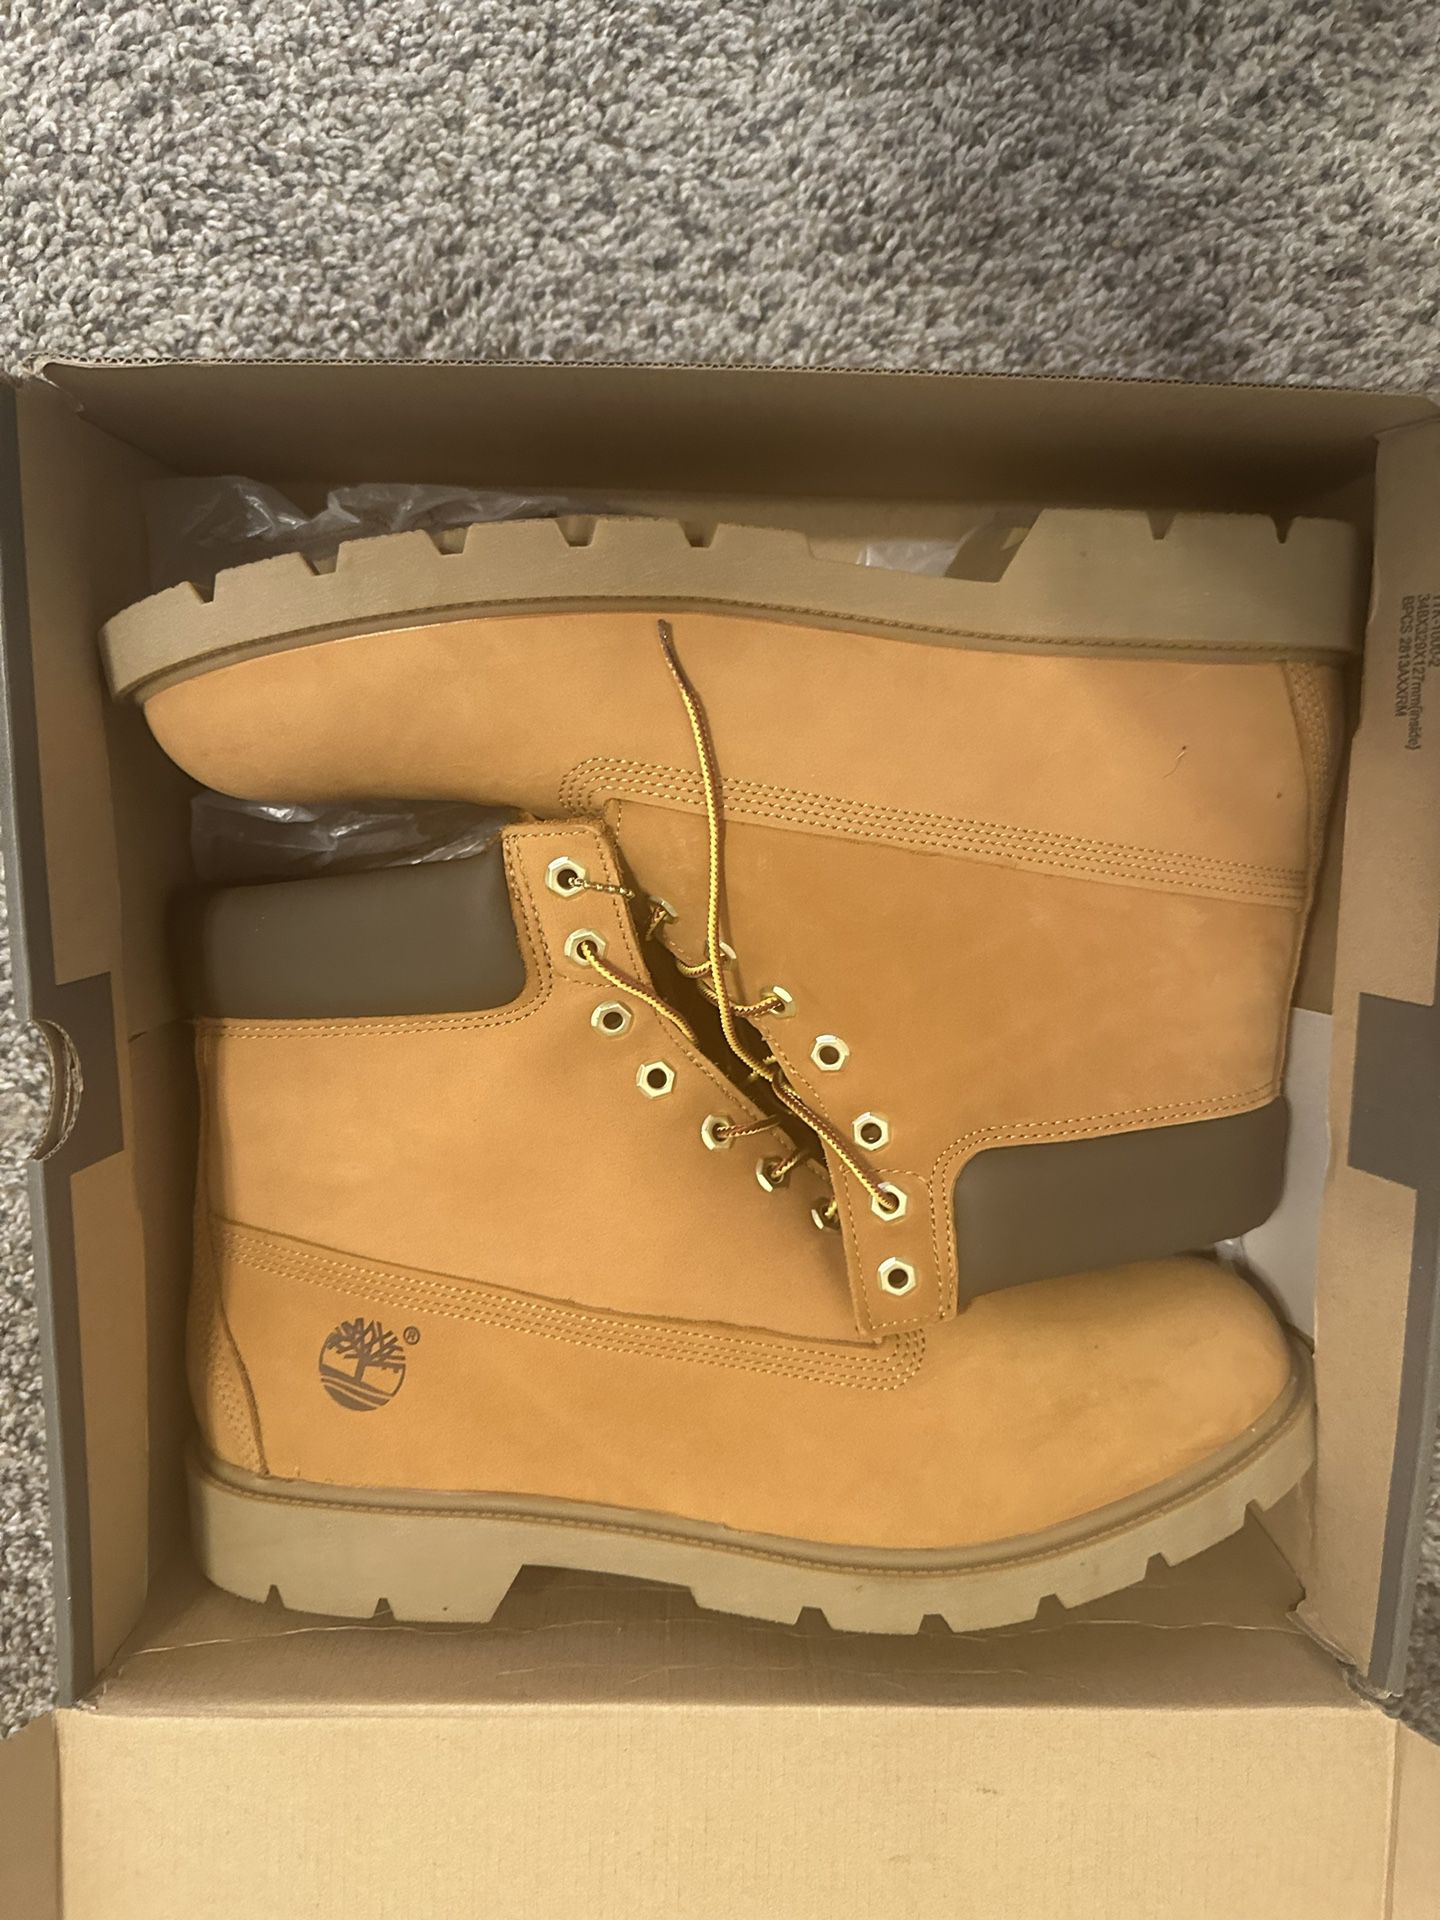 Size 14 Timberlands Brand New Never Worn